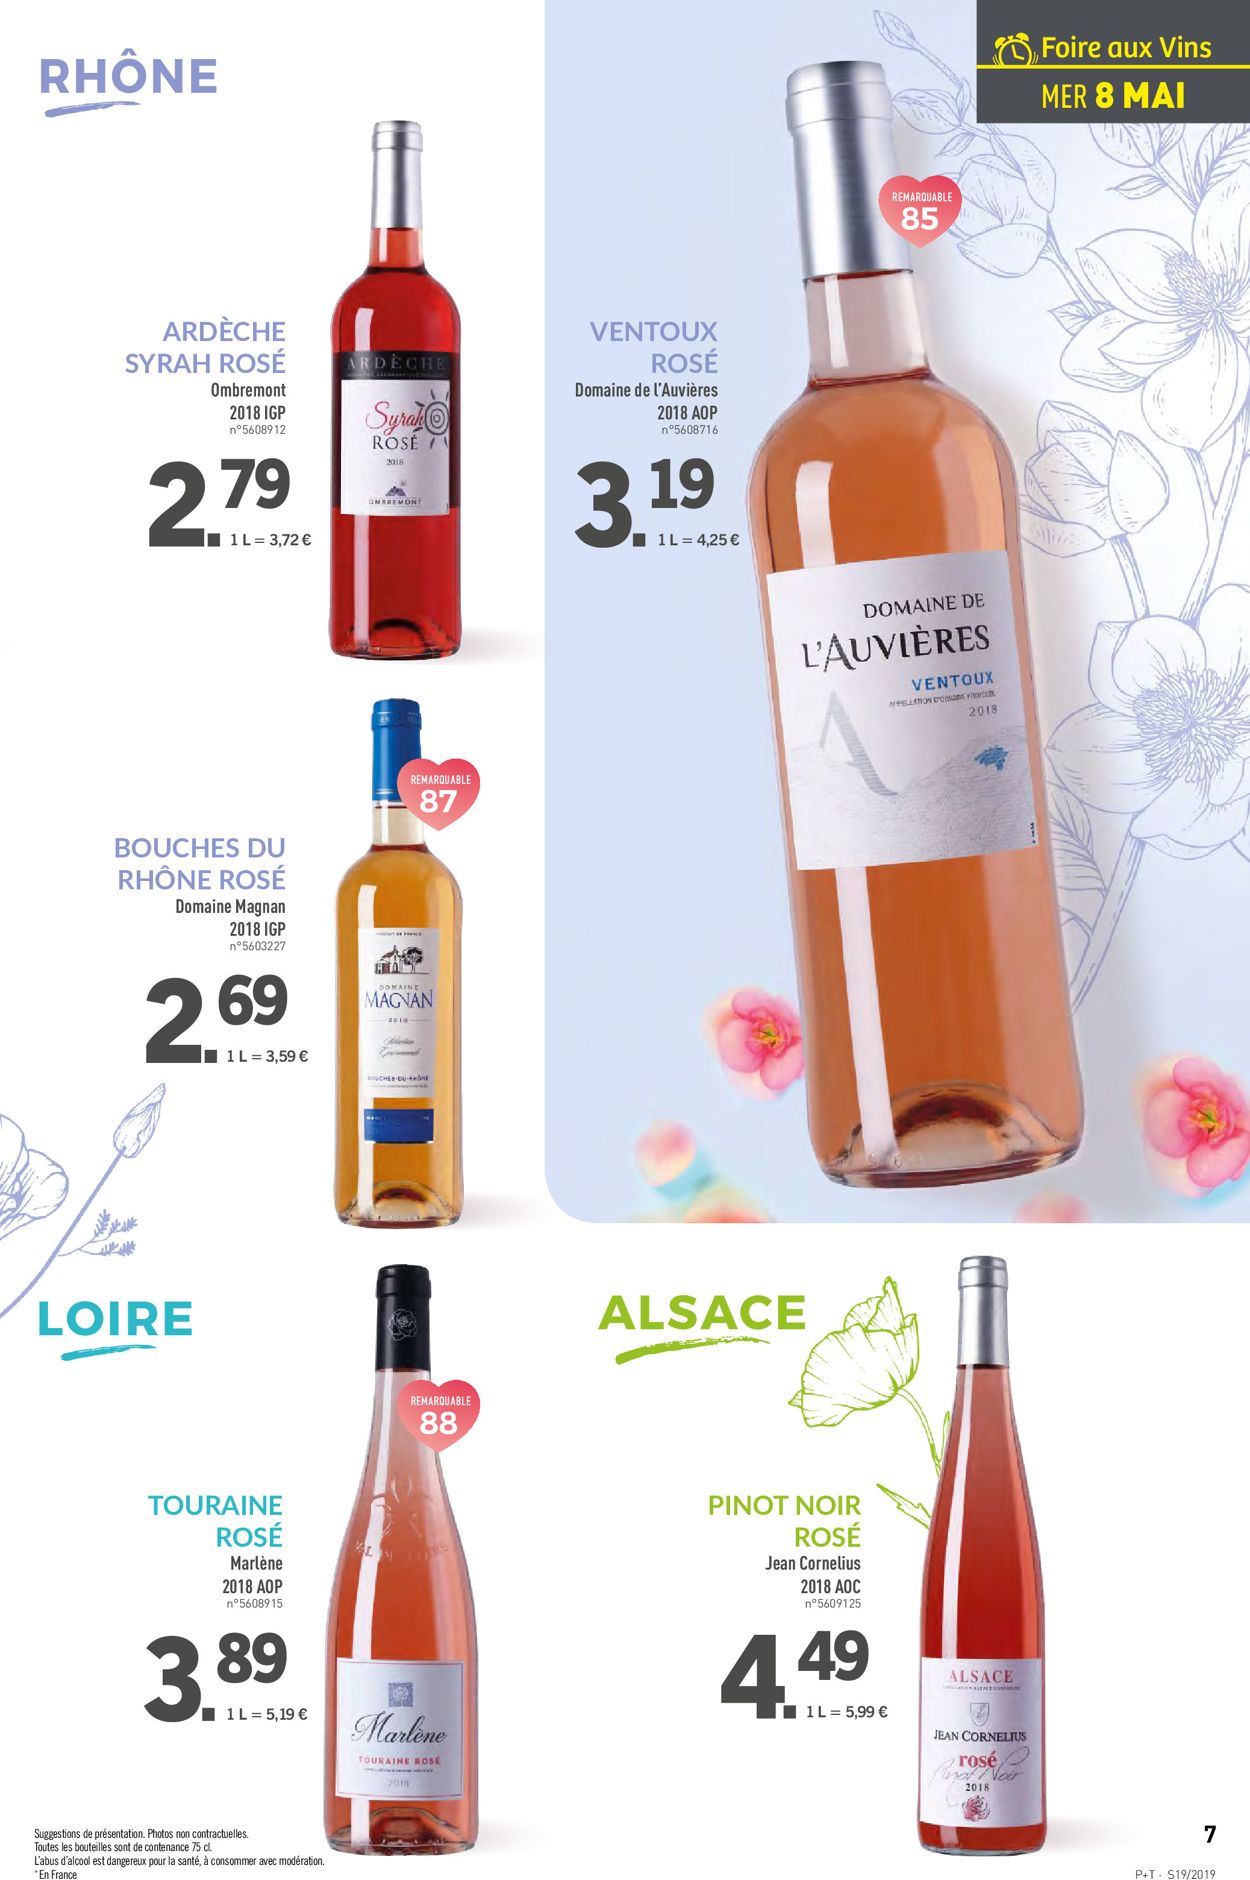 Lidl Catalogue - 08.05-14.05.2019 (Page 7)